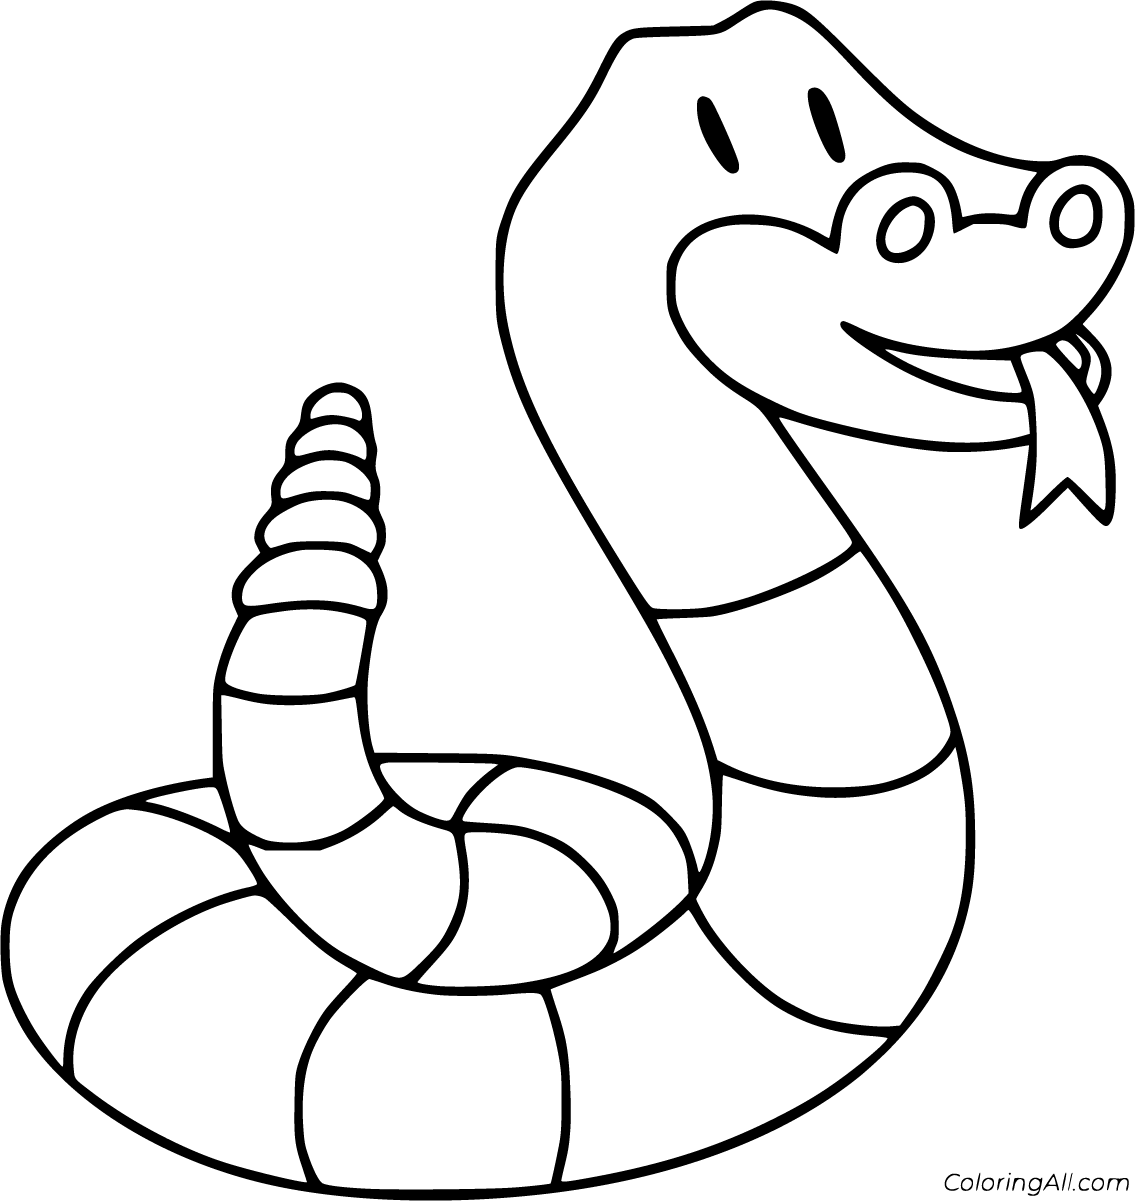 Rattlesnake Coloring Pages - ColoringAll